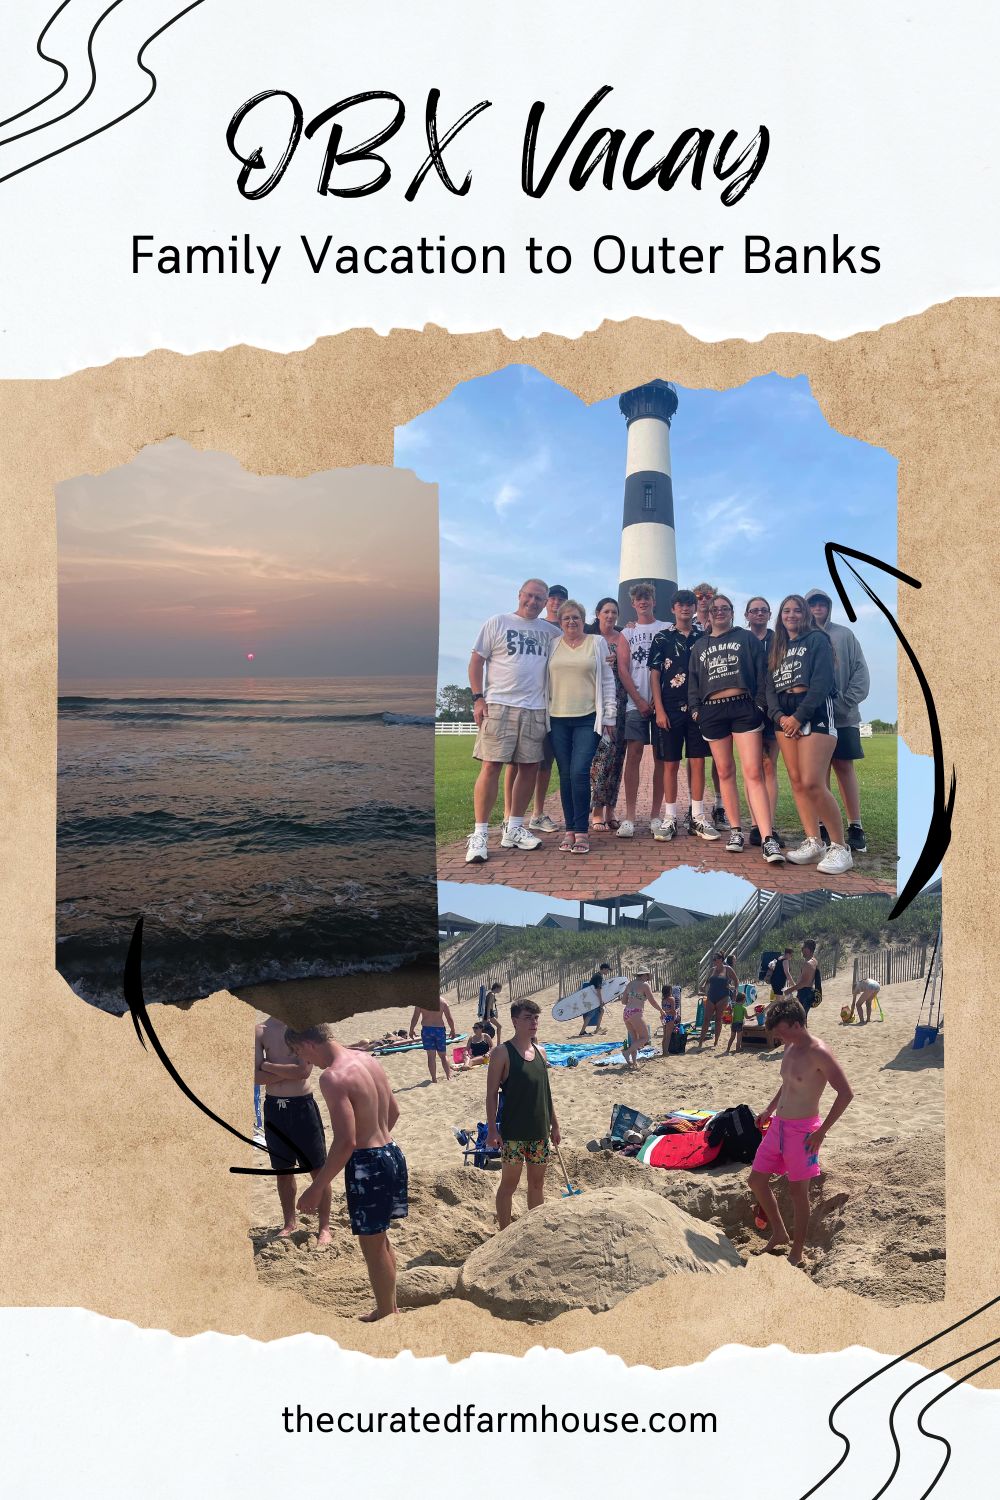 7 Days on the Outer Banks: Our Family\'s Adventure